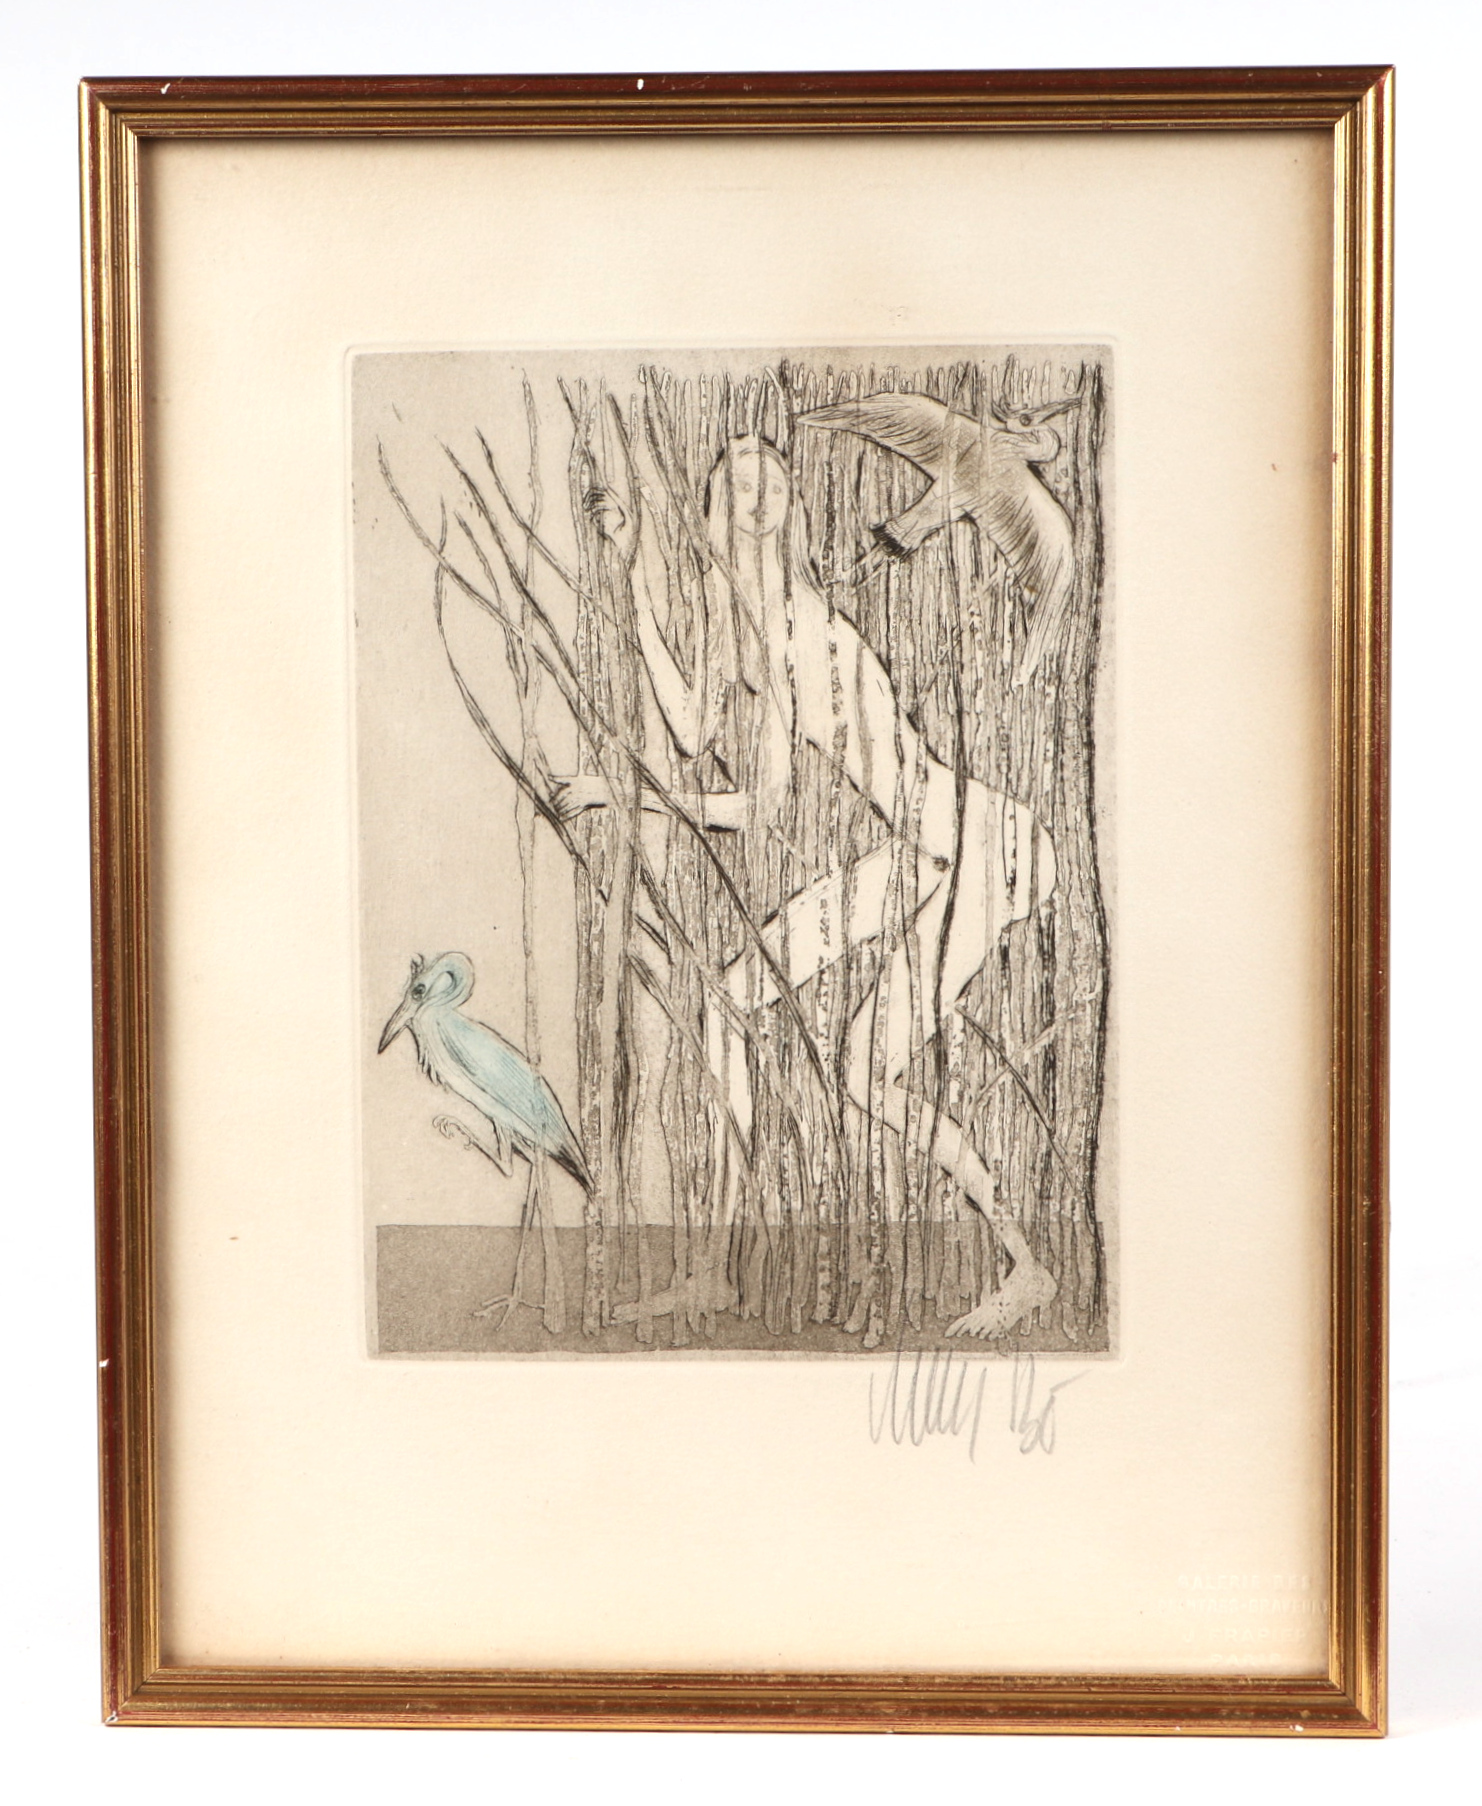 Lars Bo (1924-1999), "Female Nude with Birds in a Forest", coloured etching, signed in pencil in the